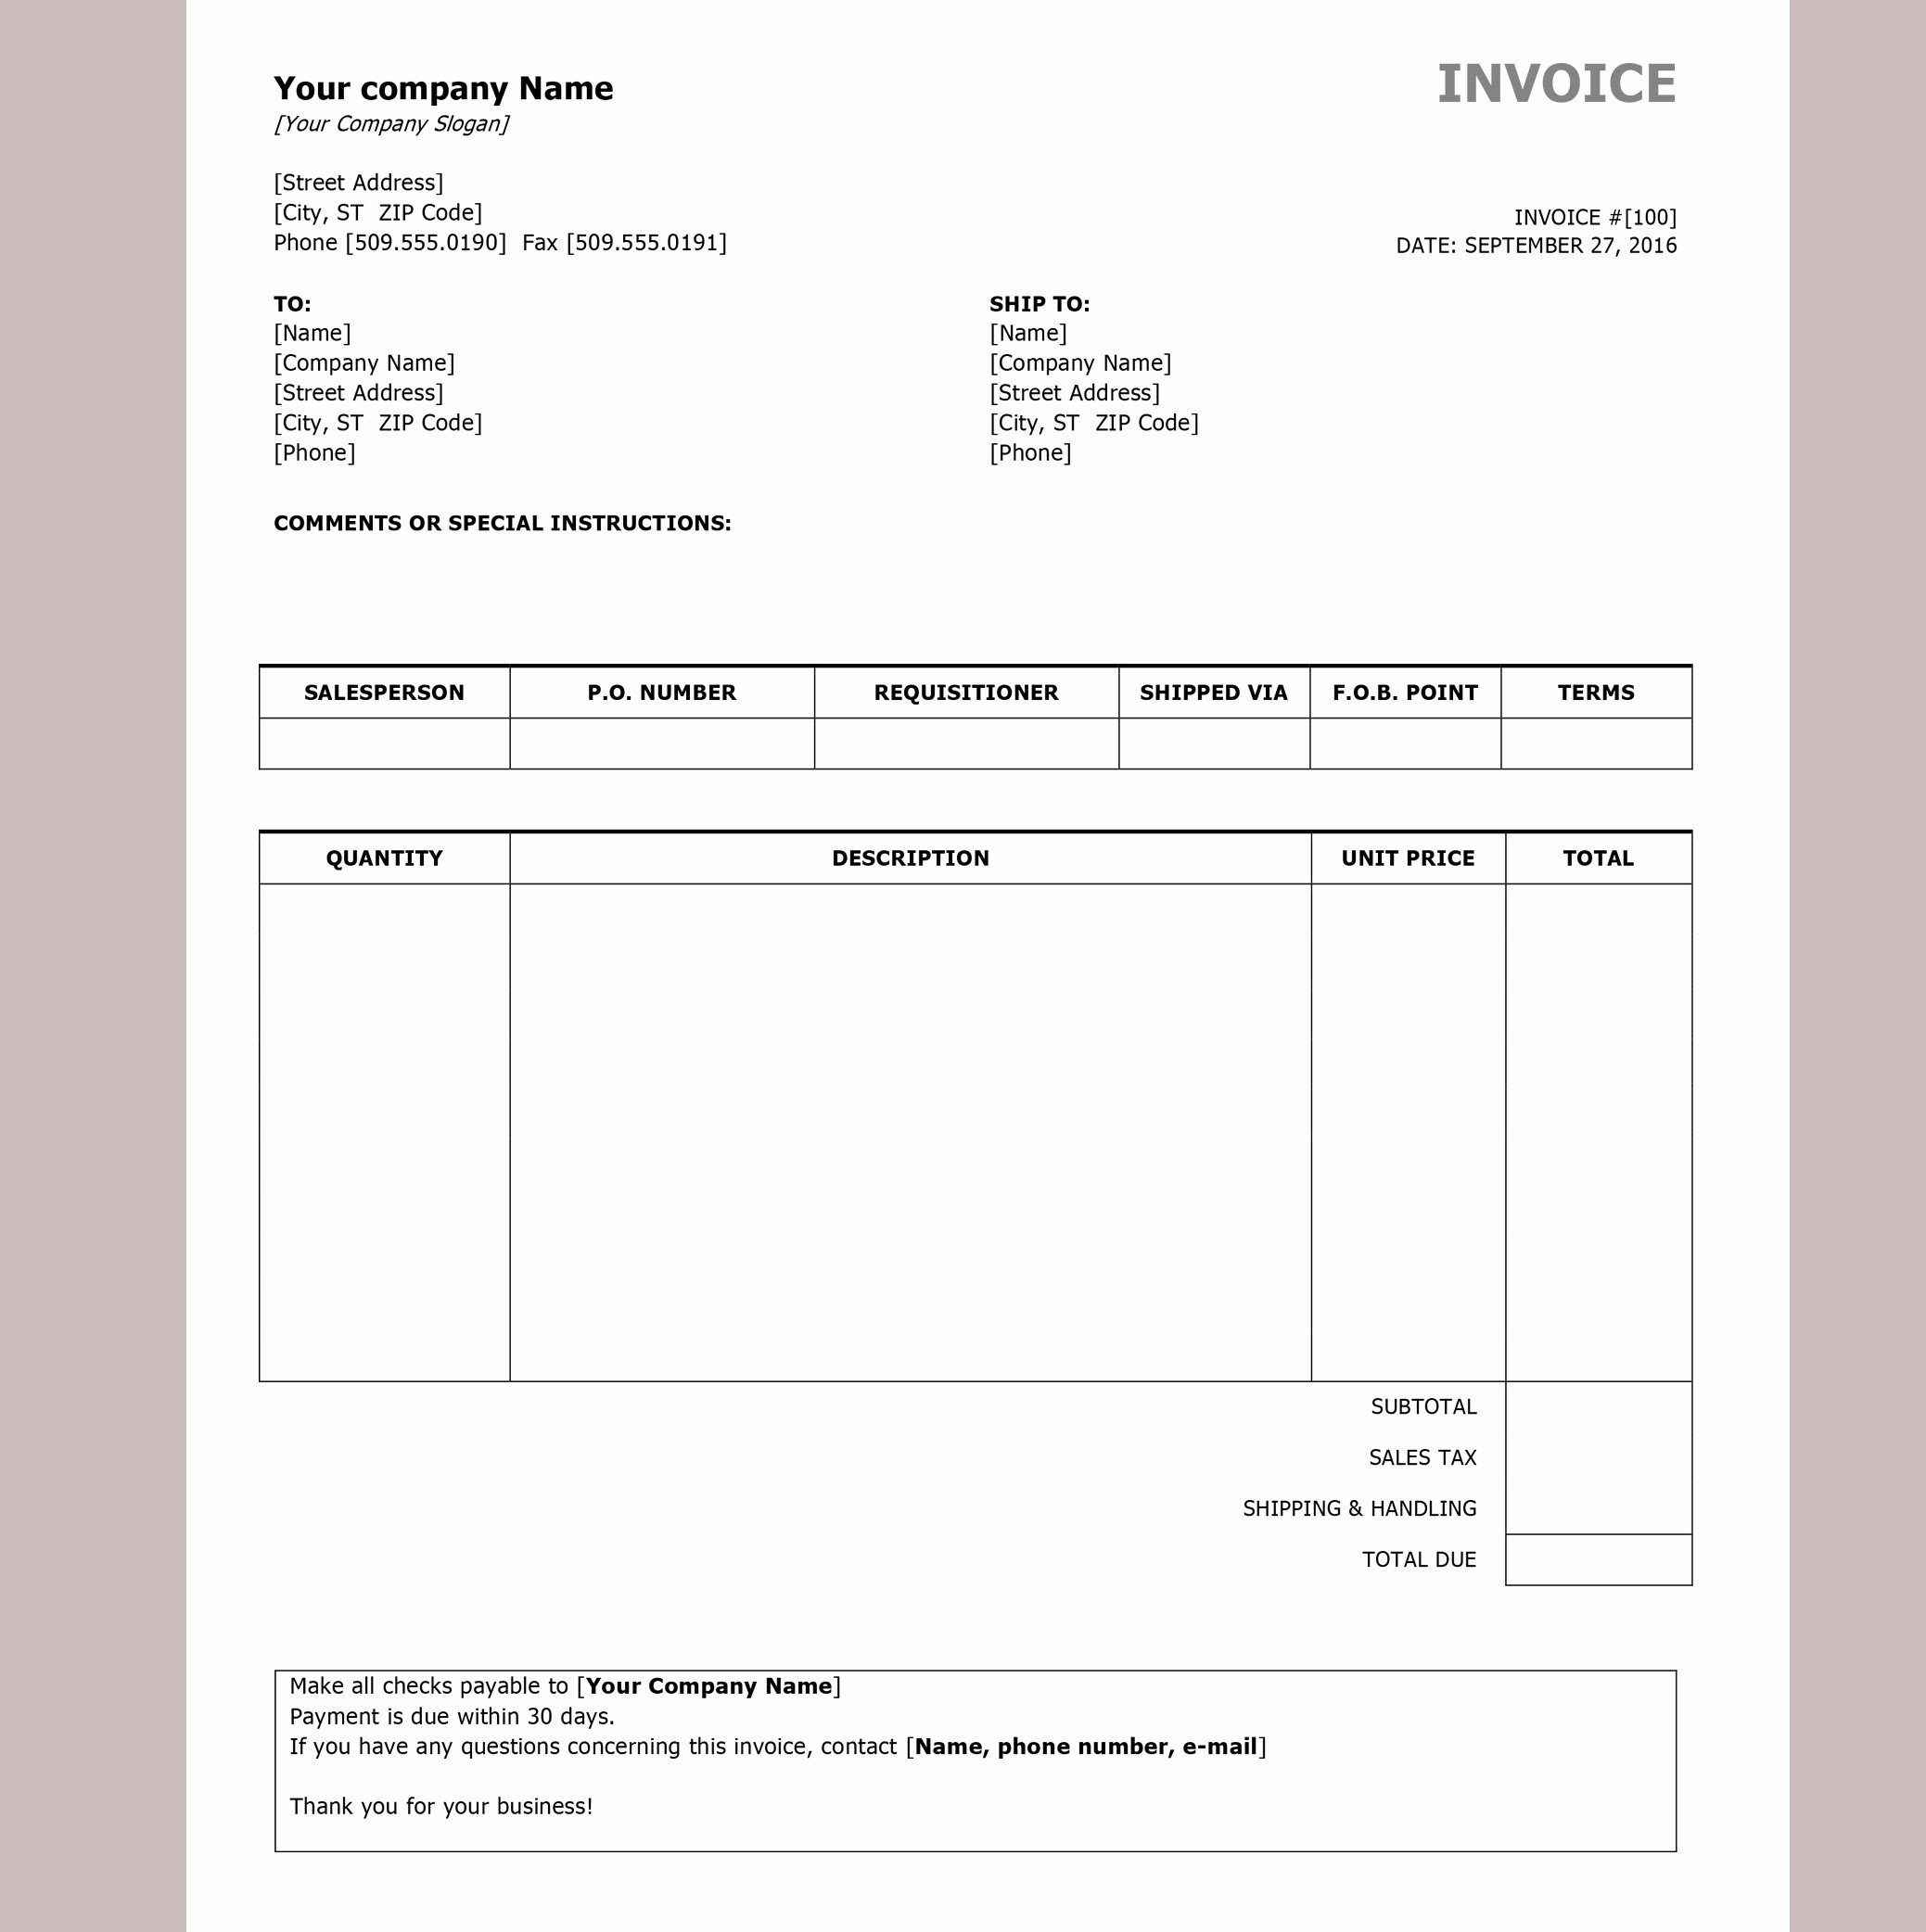 Invoice Spreadsheet Template Free Luxury Free Invoice Templates by Invoiceberry the Grid System